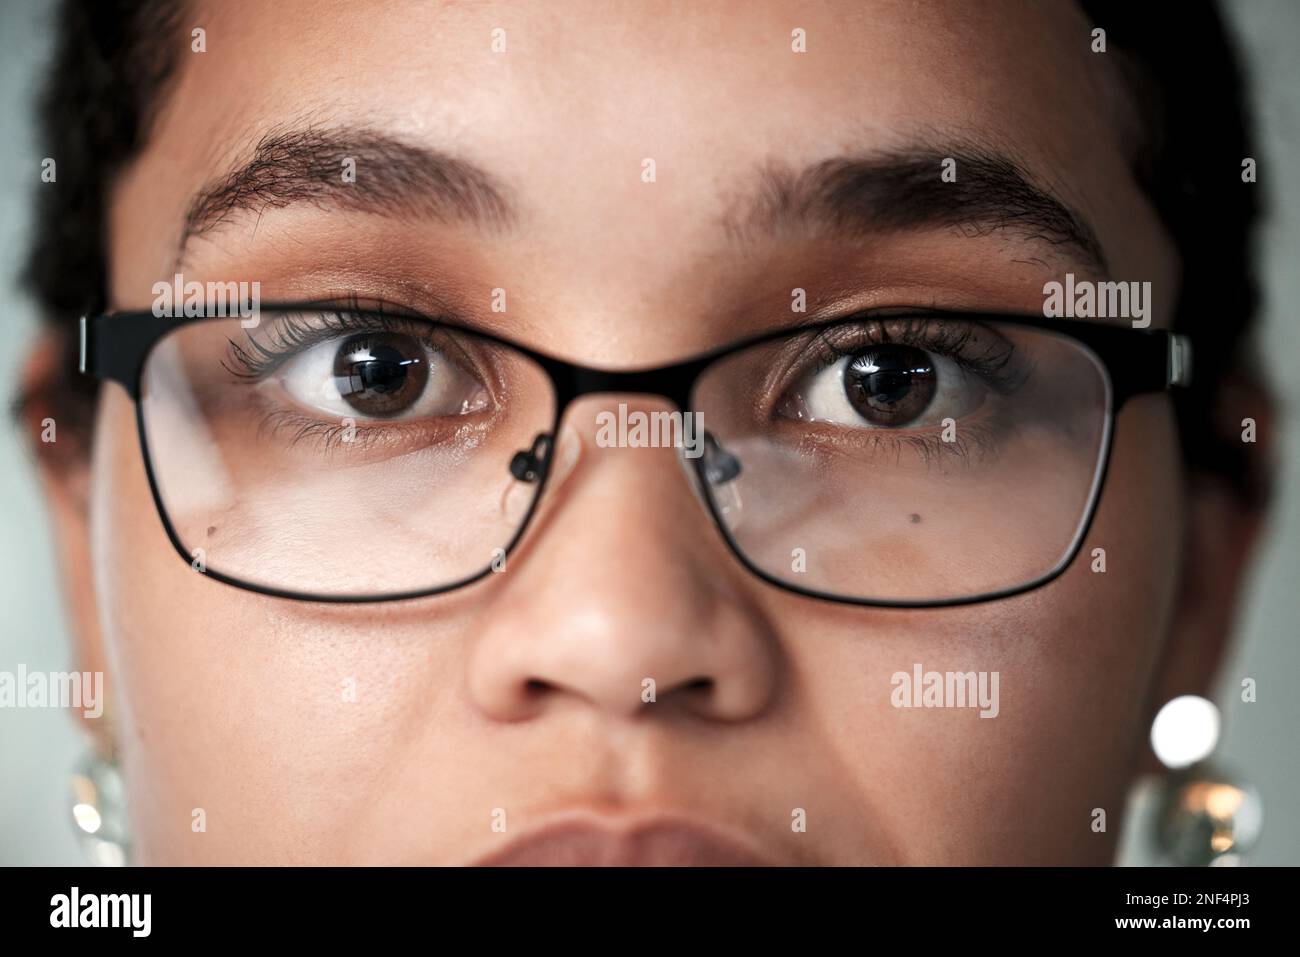 Black woman portrait, eye vision and glasses of a young person eyes at health consultation. Lens, frame and eyeglasses at a retail store for eyewear Stock Photo